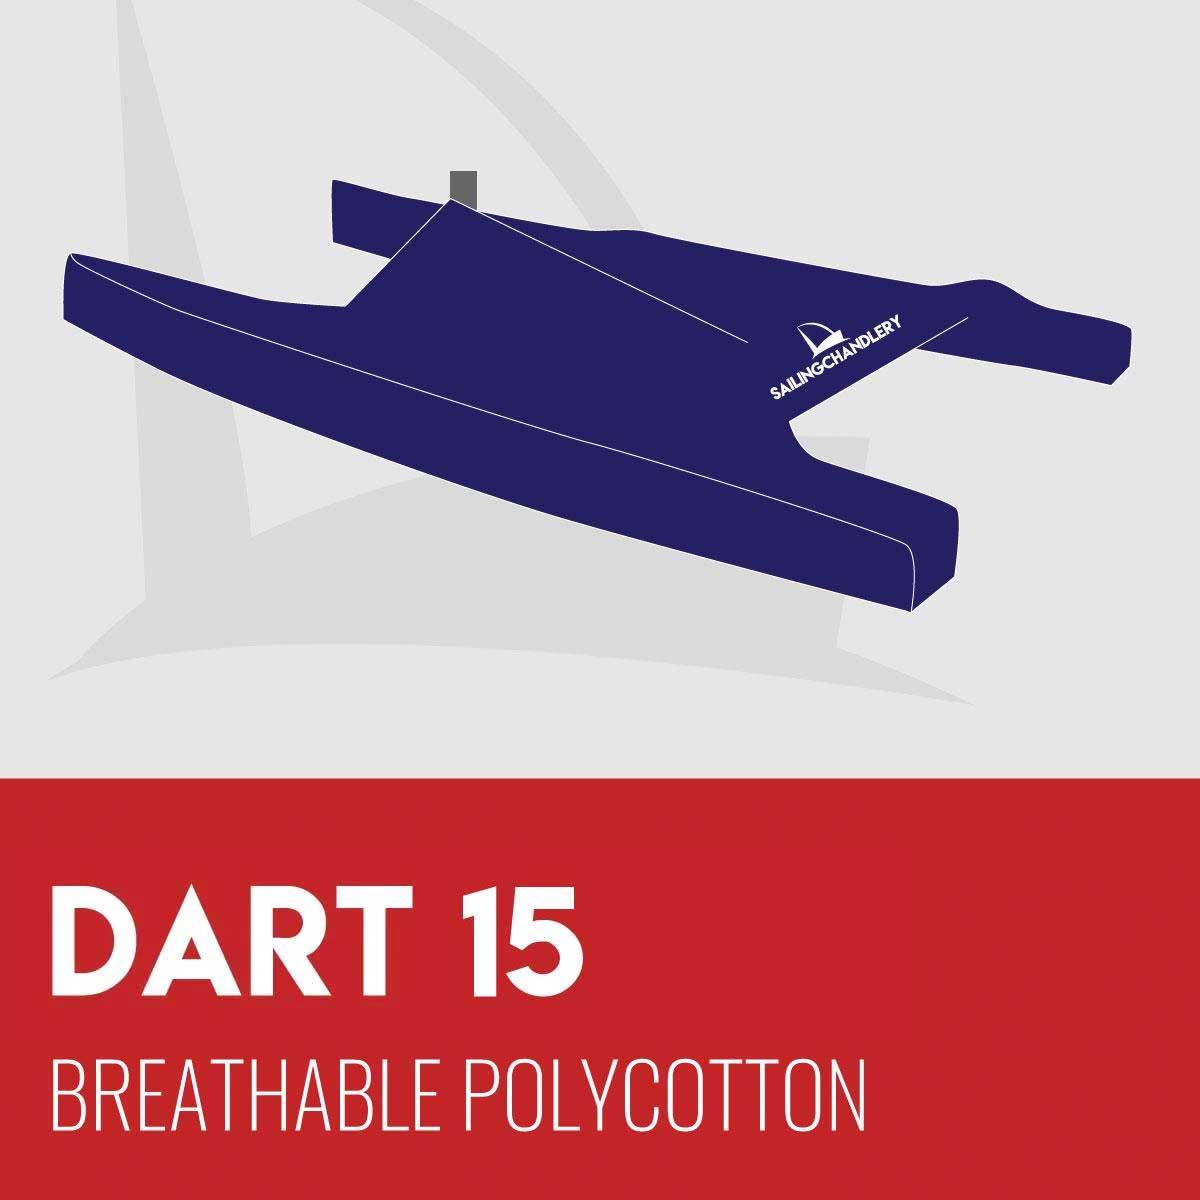 Dart 15 Boat Cover - Breathable Polycotton